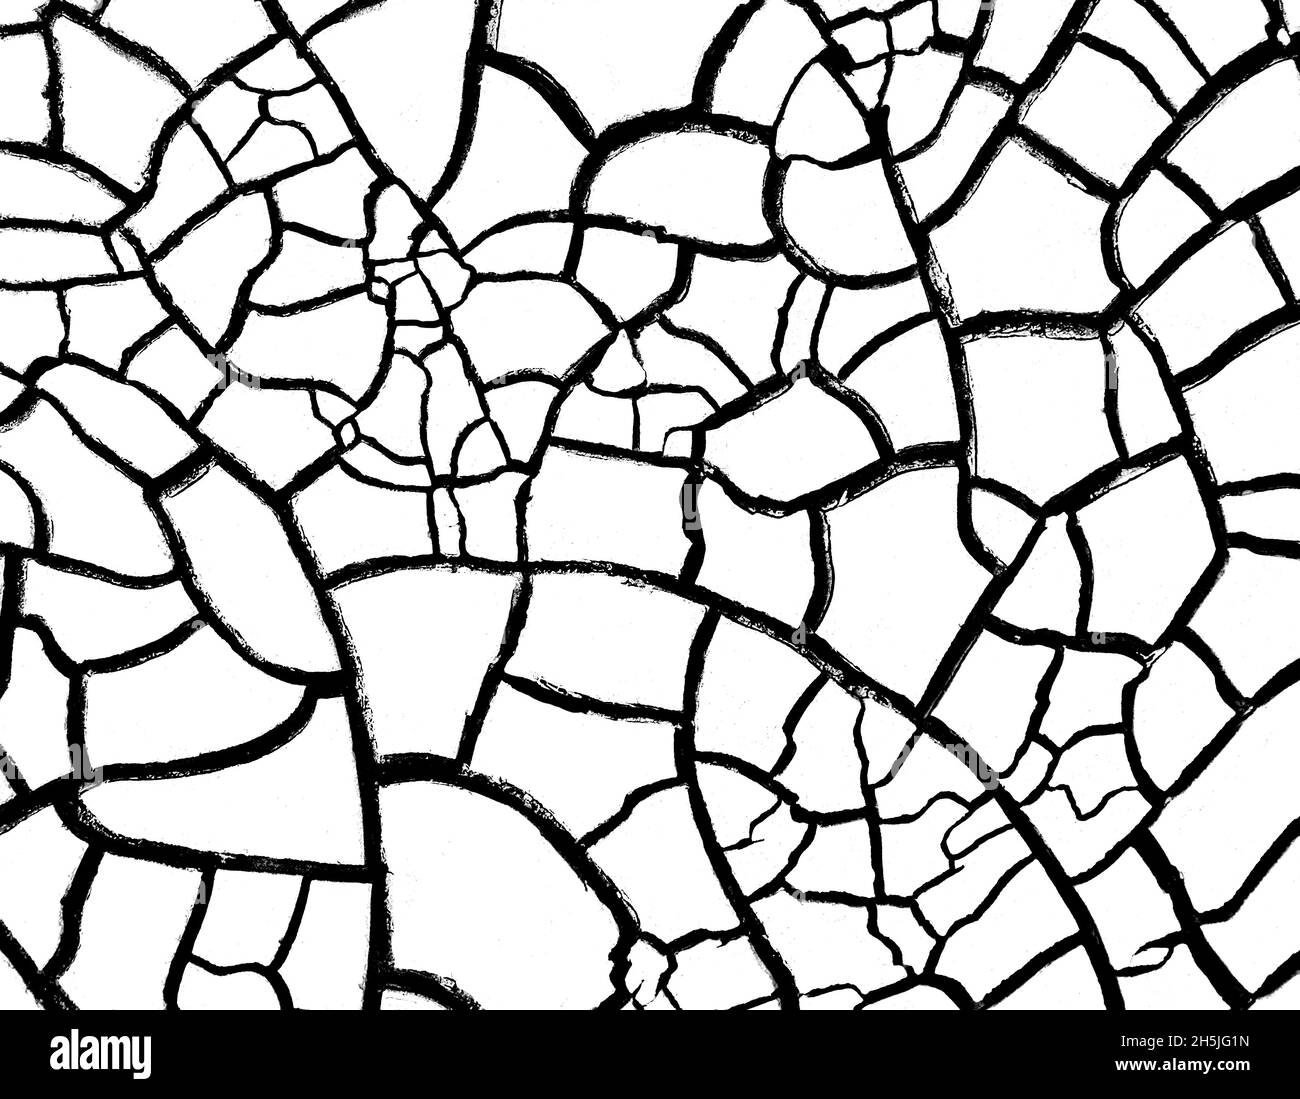 Dried cracked ground, black and white texture overlay Stock Photo